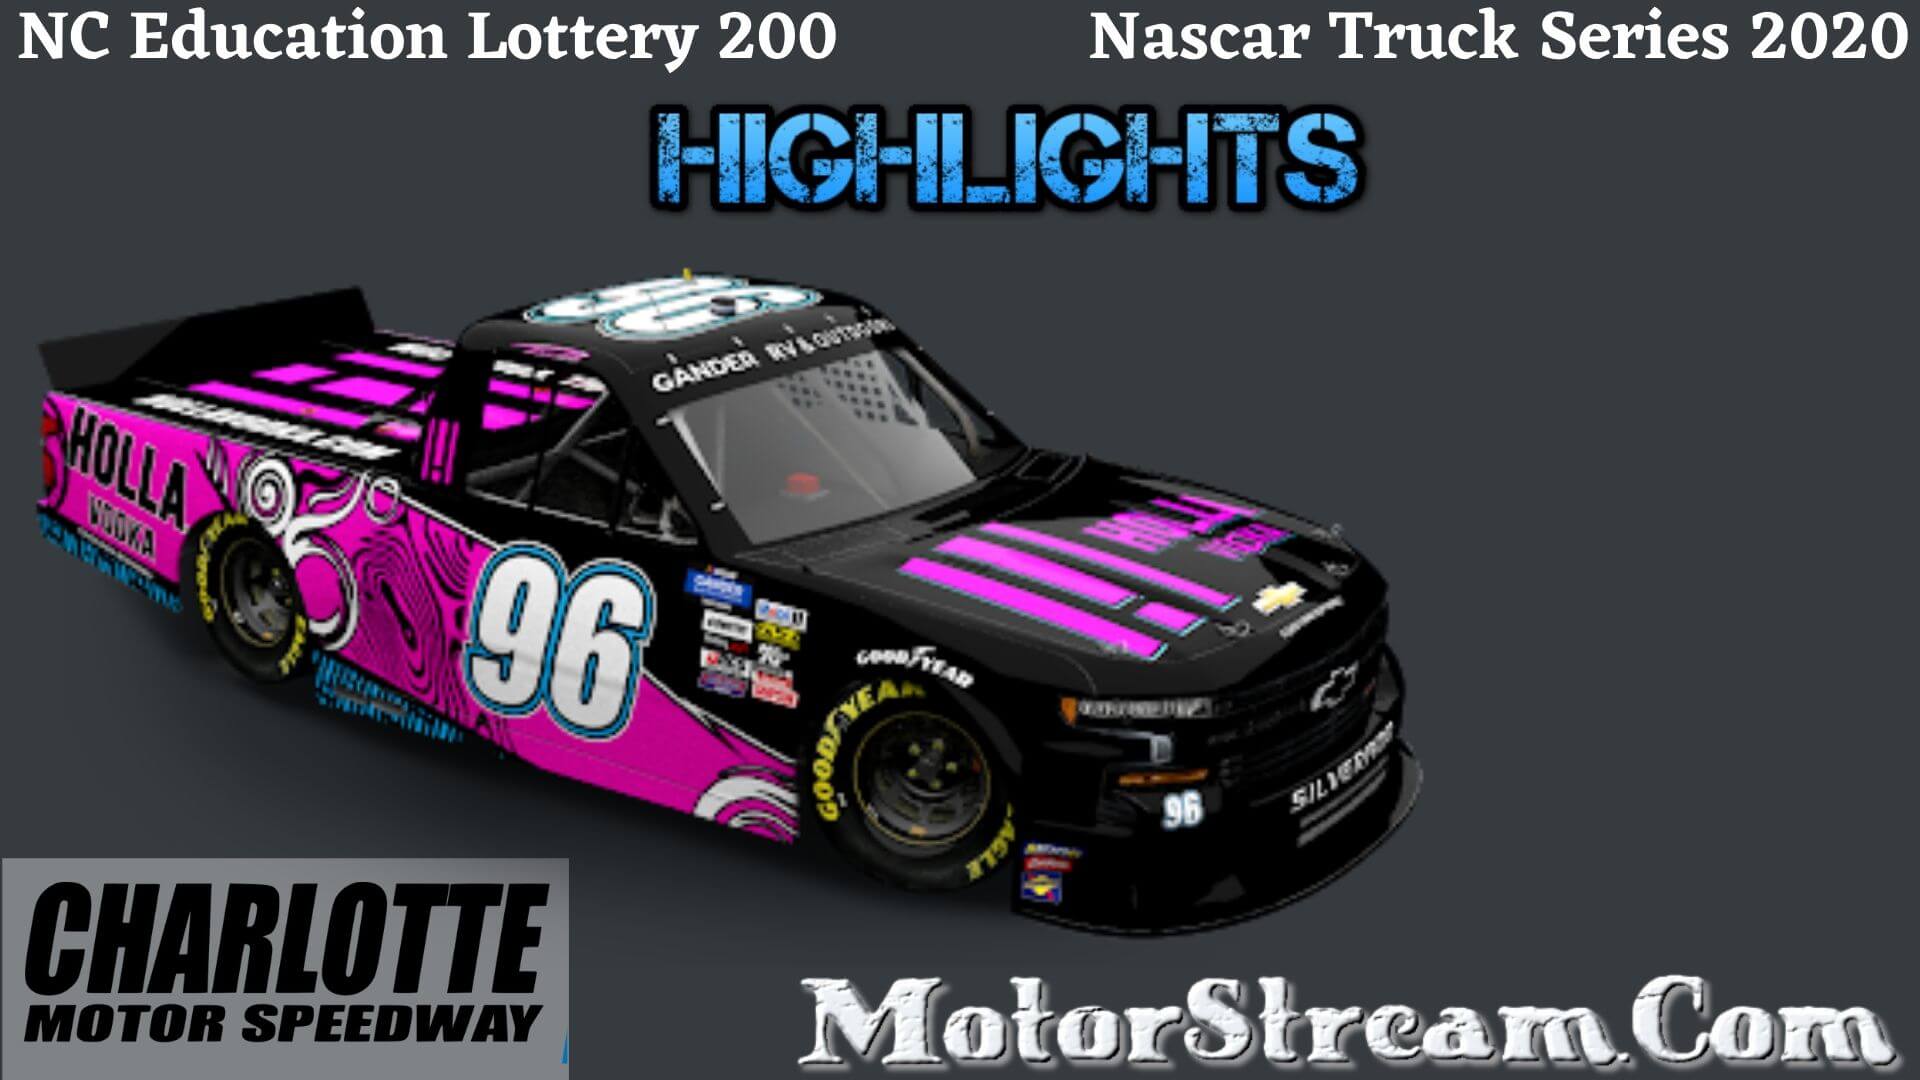 NC Education Lottery 200 Highlights 2020 Truck Series